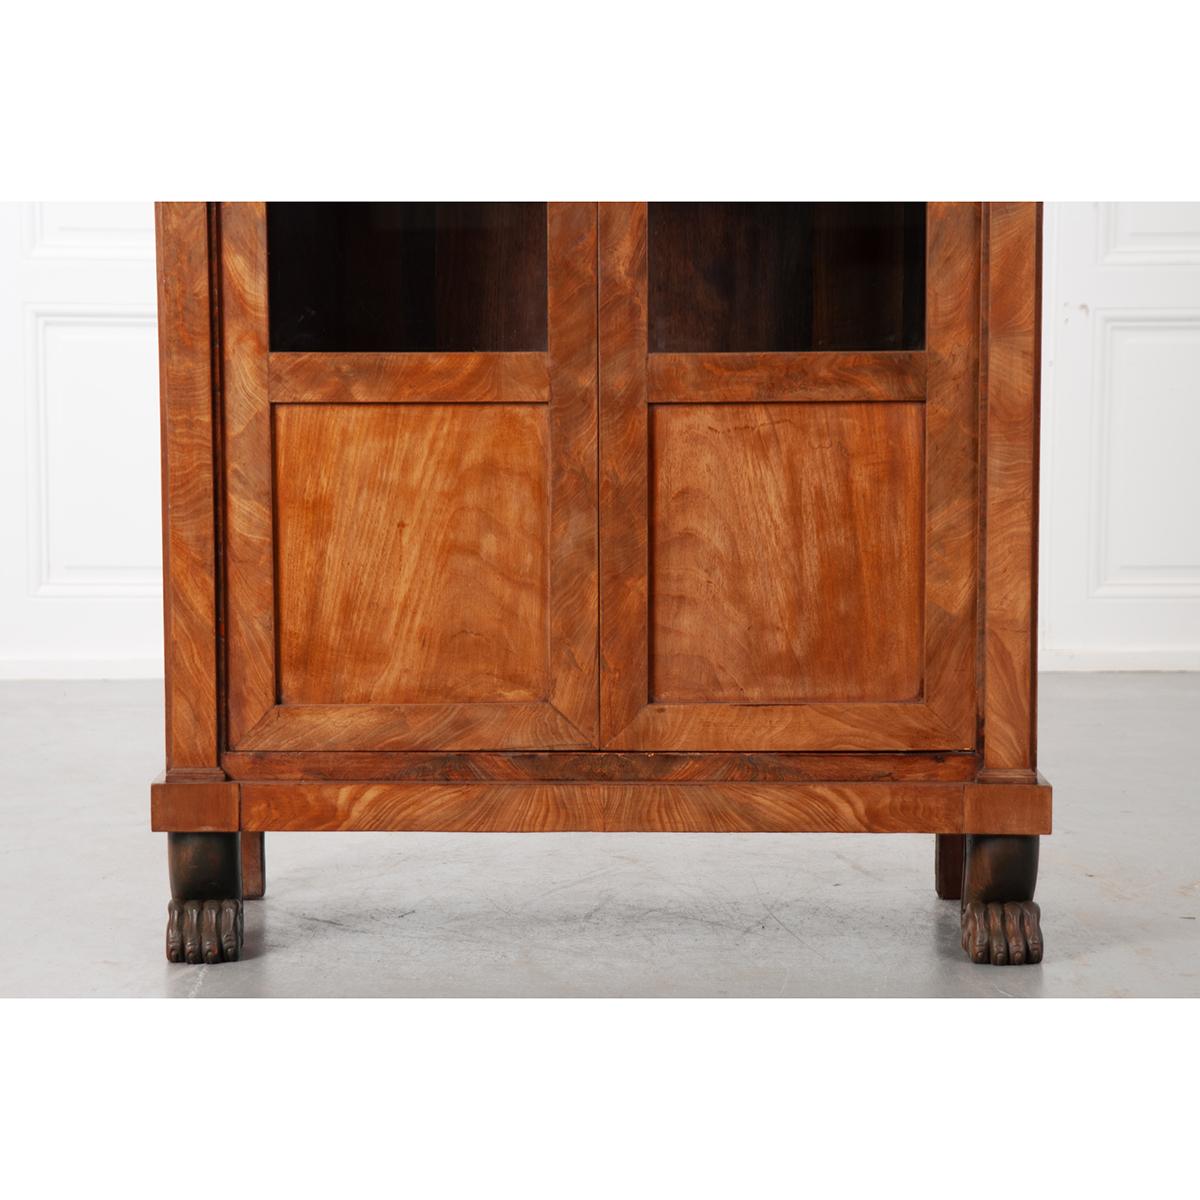 Other French 19th Century Petite Mahogany Bibliotheque